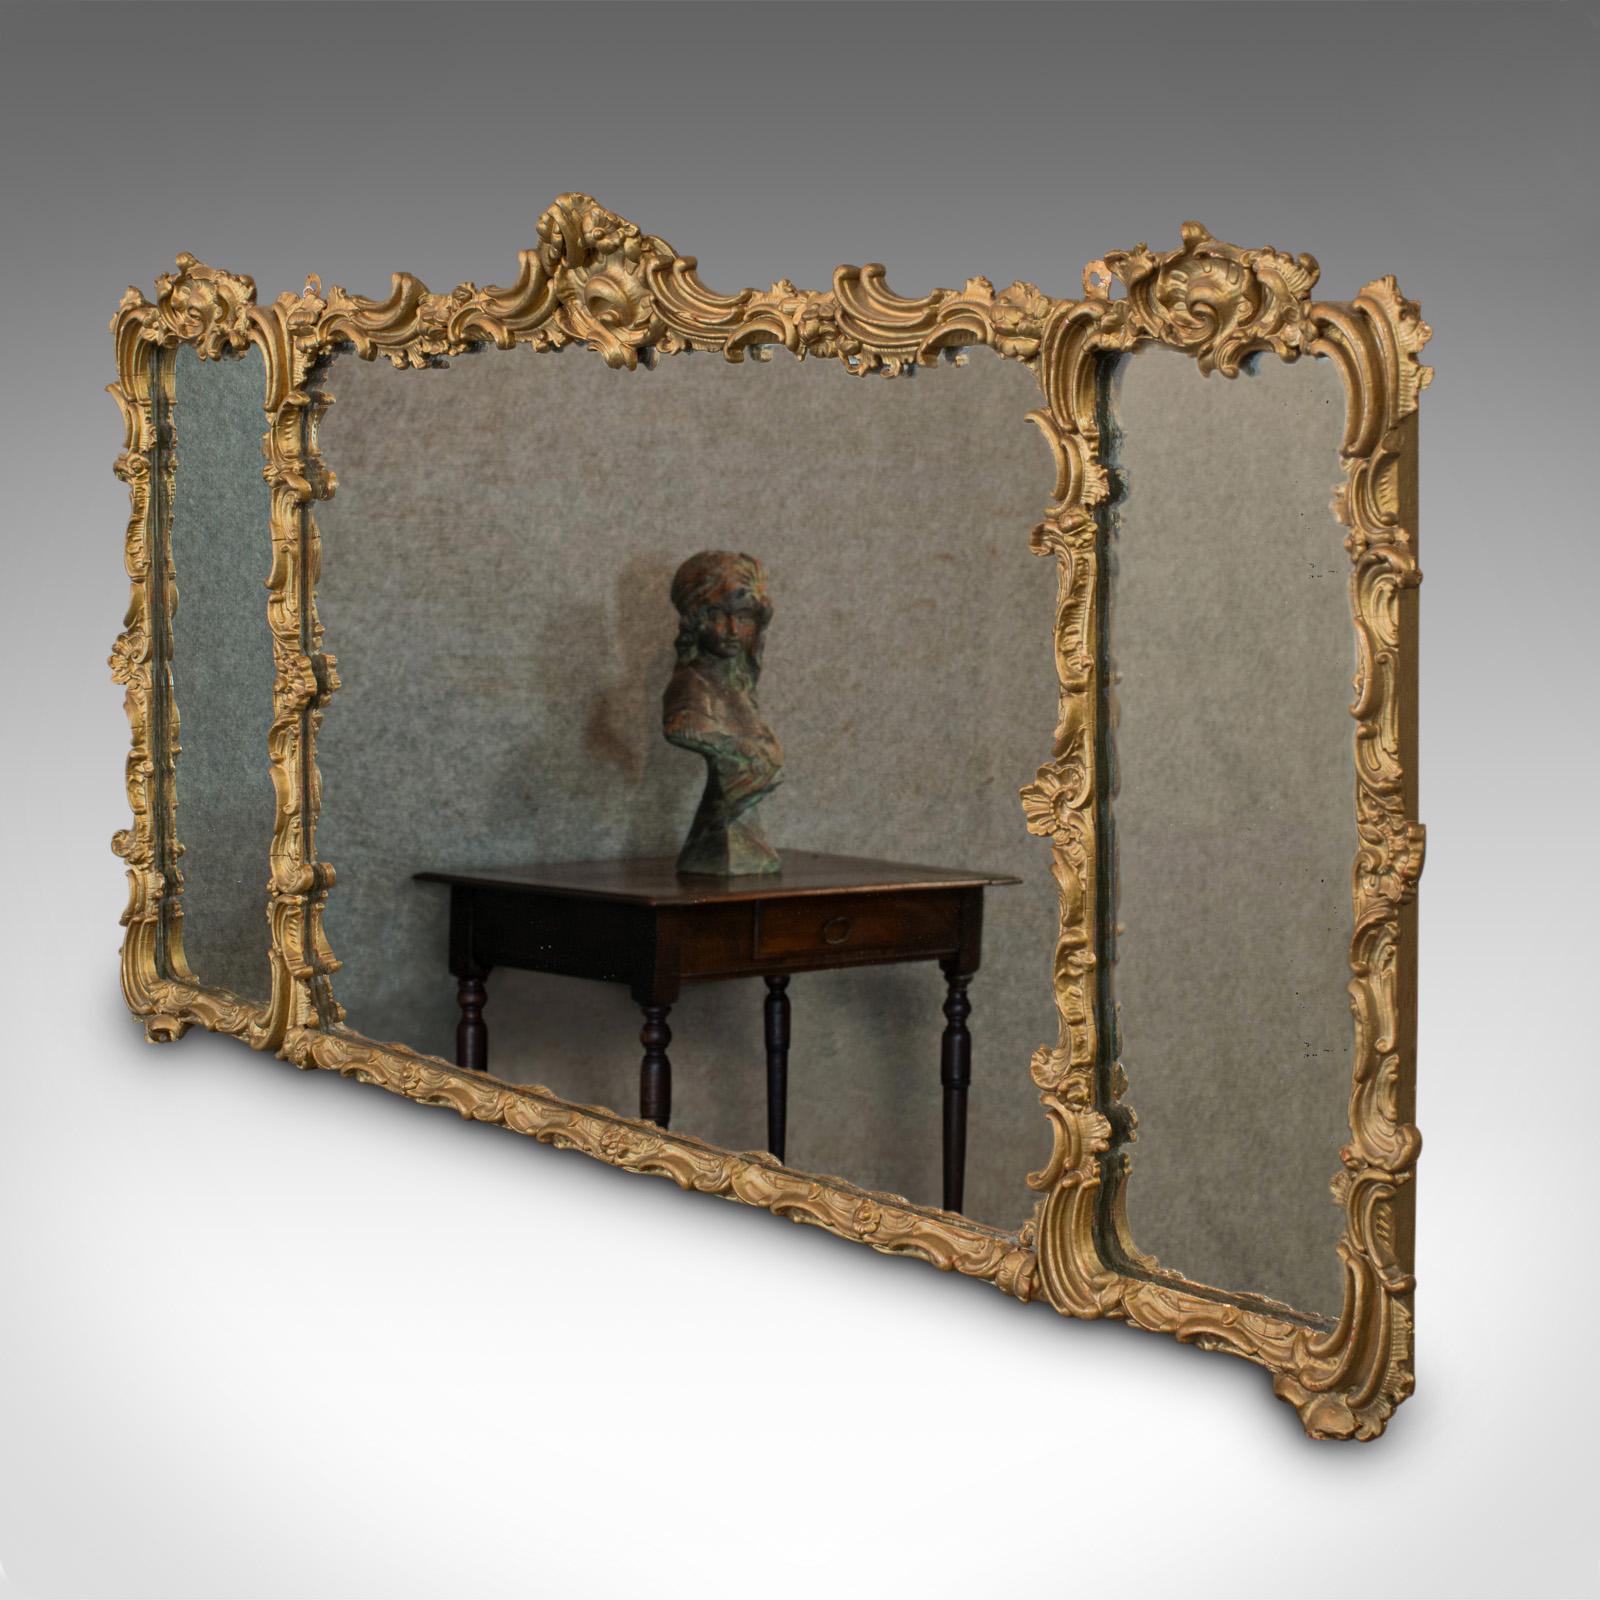 This is an antique triptych mirror. An Italian, gilt gesso overmantle hanging mirror, dating to the mid 19th century, circa 1850.

Generously sized, attractive mirror
Displays a desirable aged patina
Radiant gilt gesso in very good